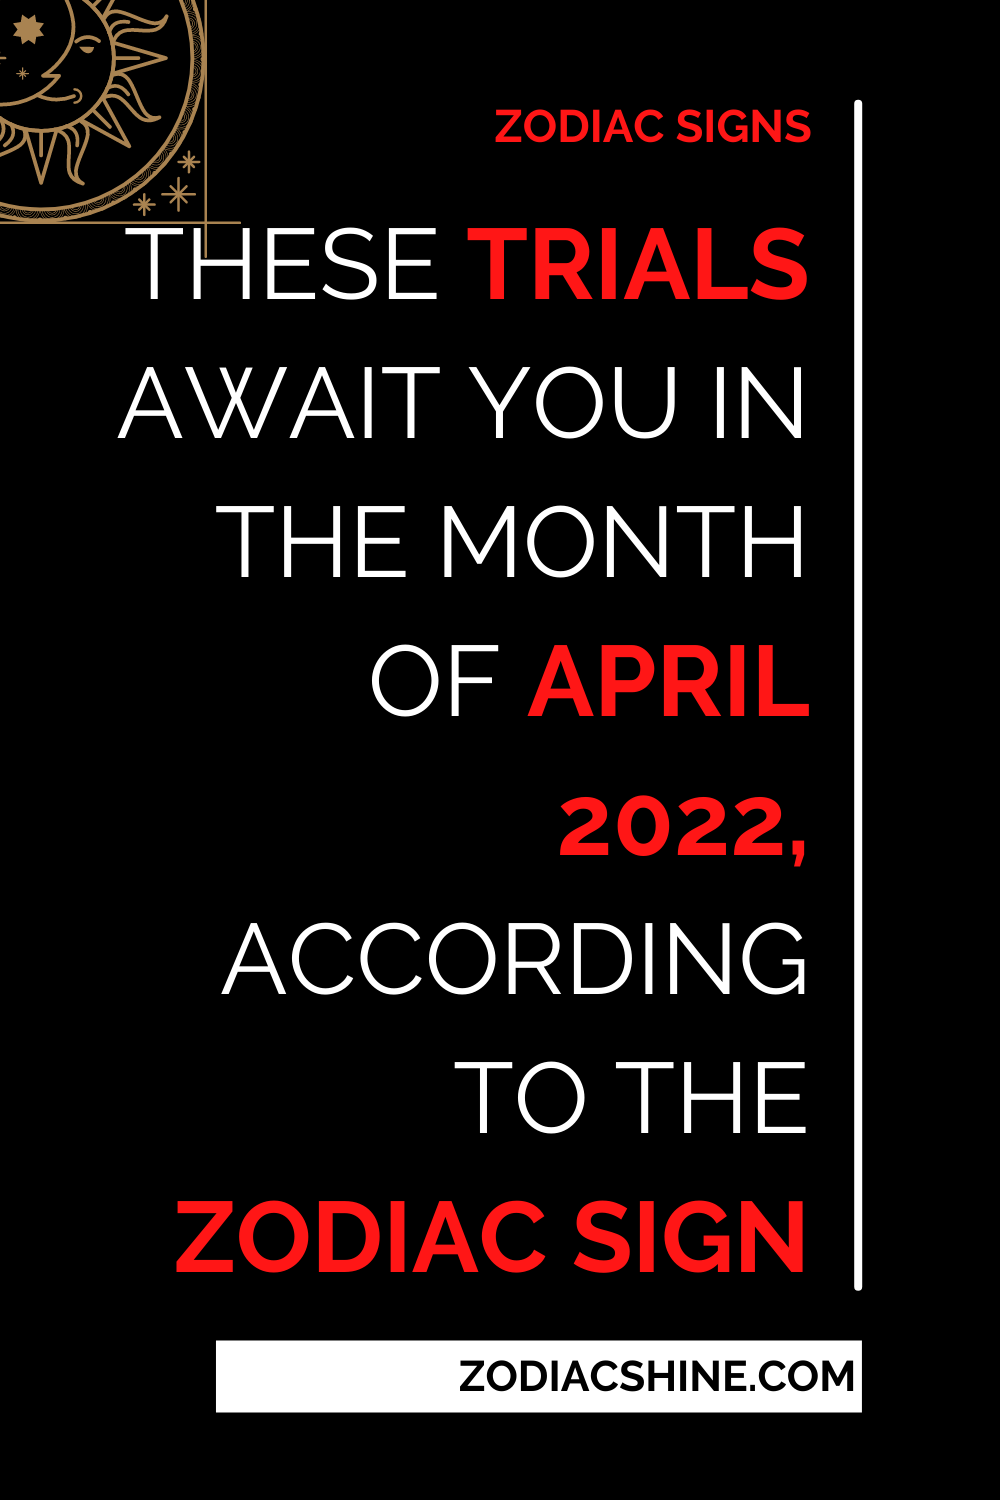 These Trials Await You In The Month Of April 2022 According To The Zodiac Sign